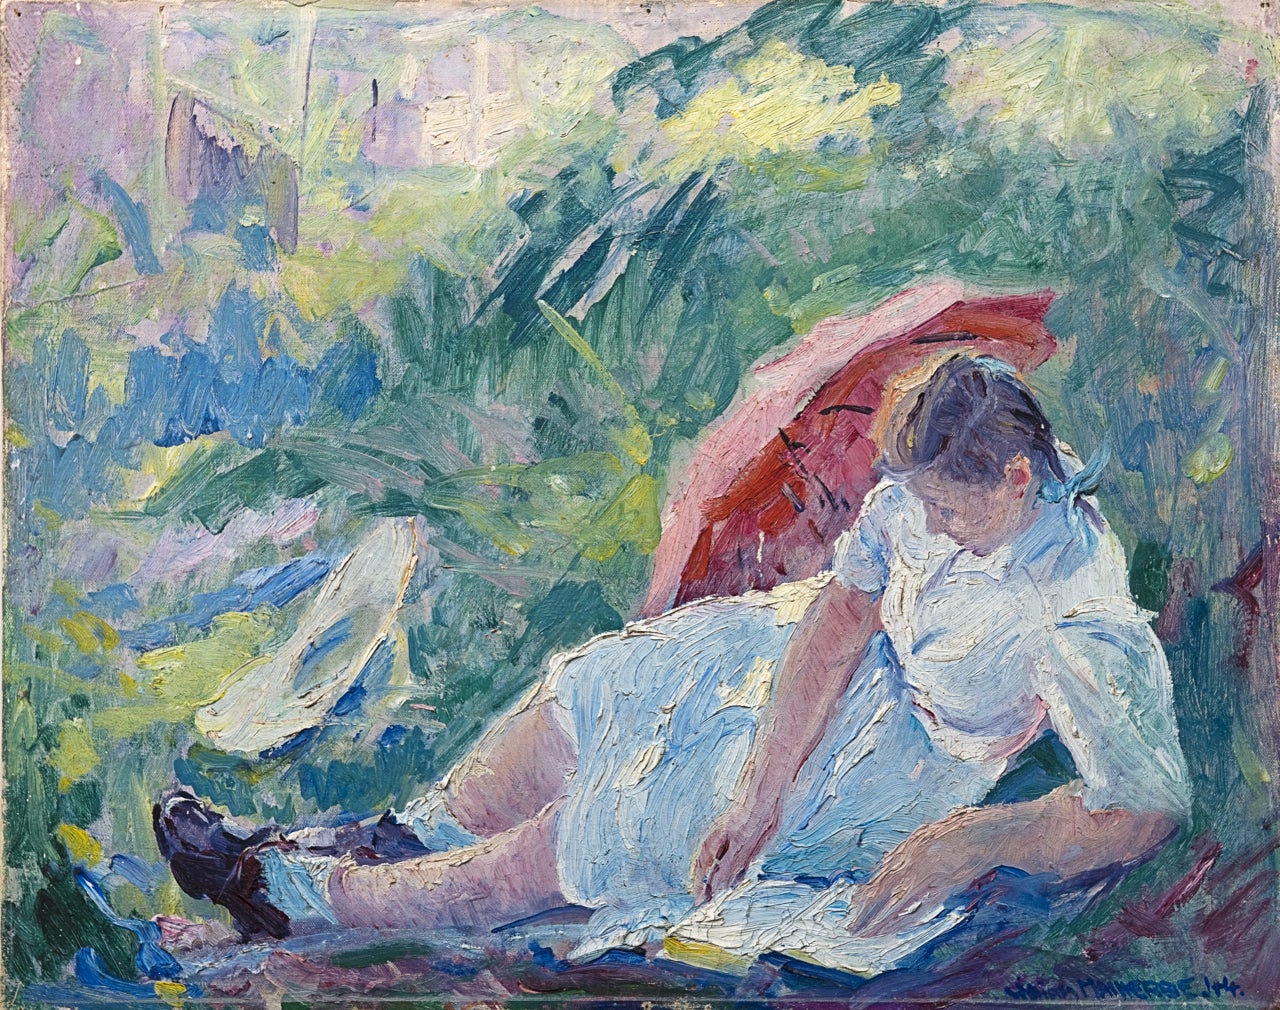 "Reclining Girl with Parasol"